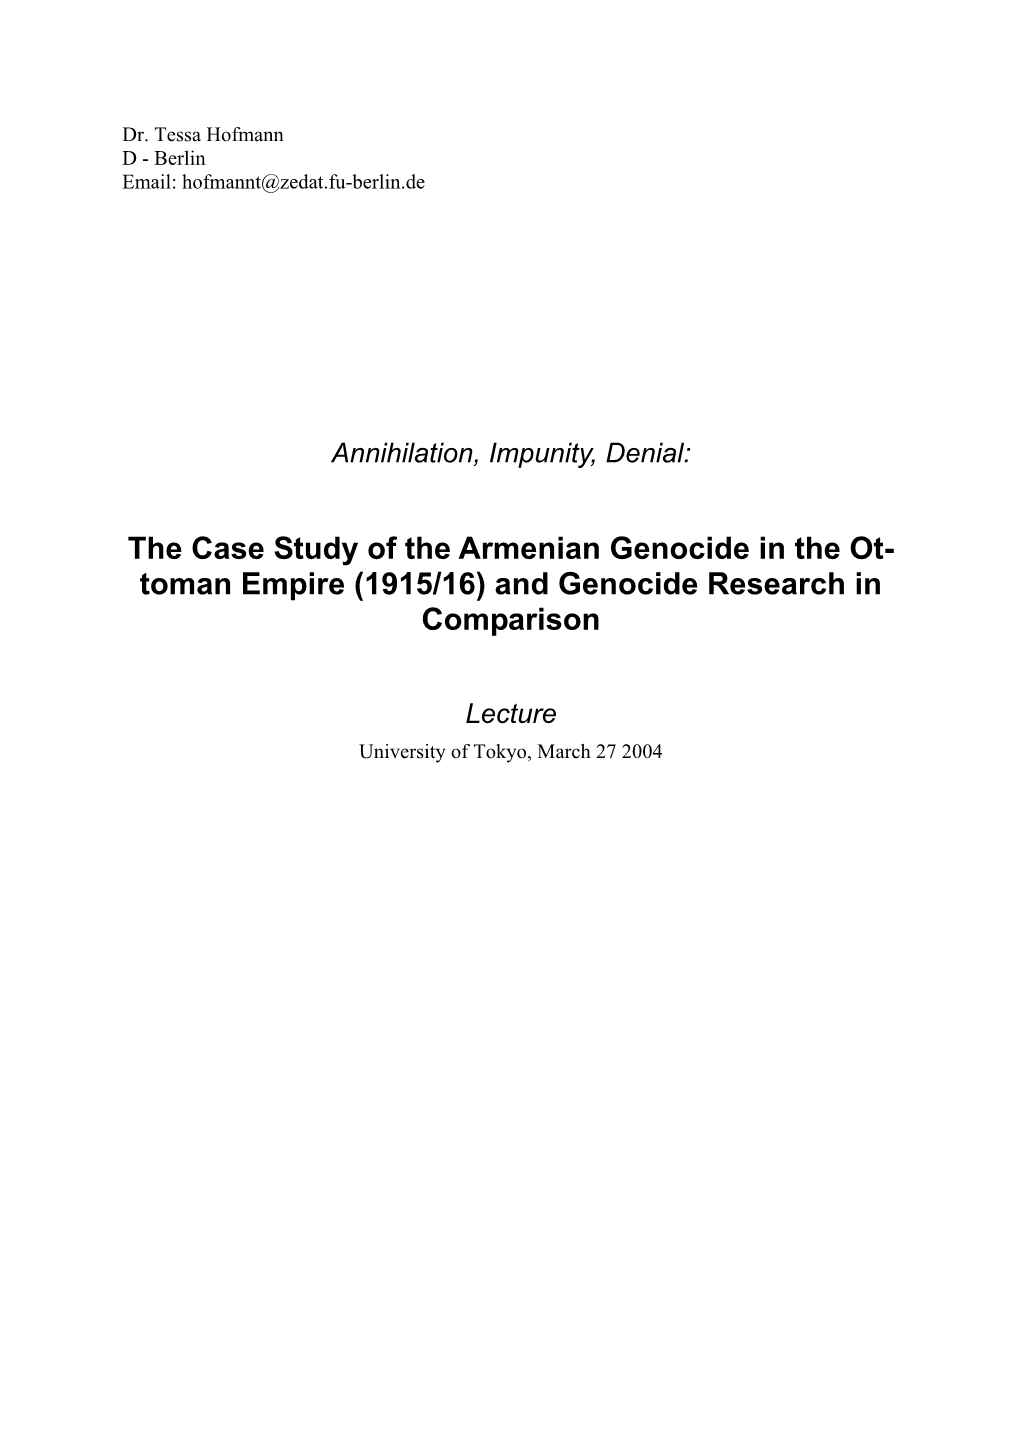 The Case Study of the Armenian Genocide in the Ot- Toman Empire (1915/16) and Genocide Research in Comparison